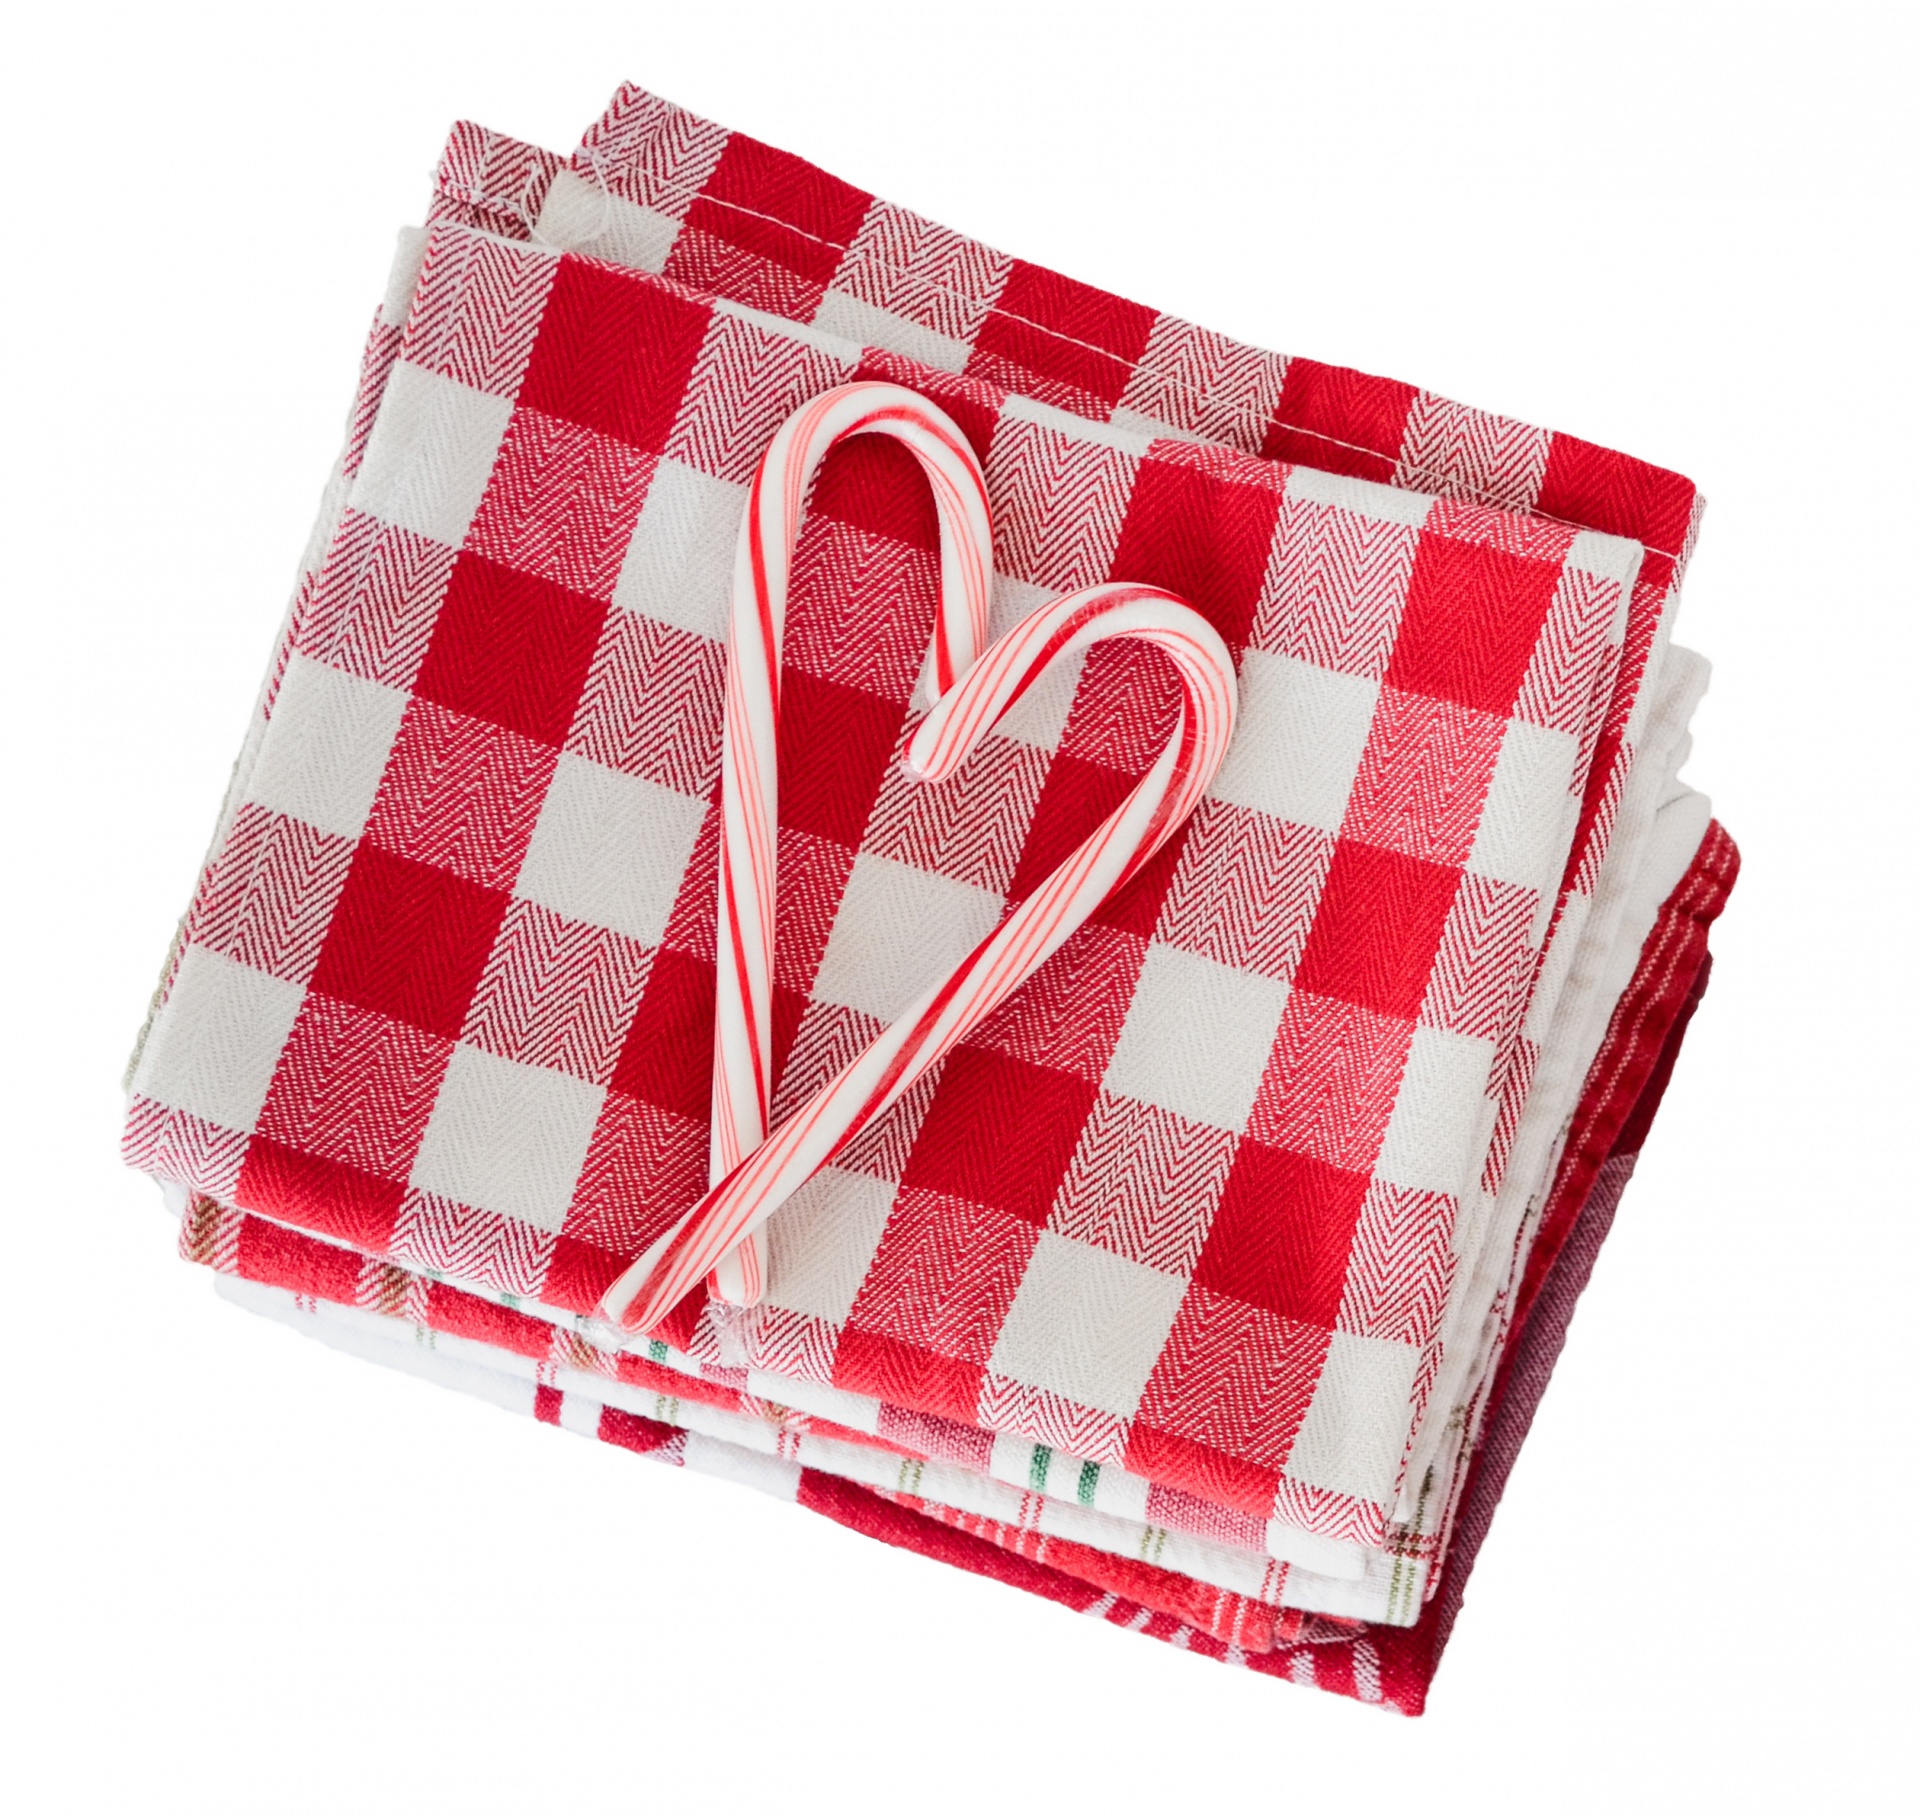 Candy cane heart and gingham checks red and white table cloth christmas background isolated